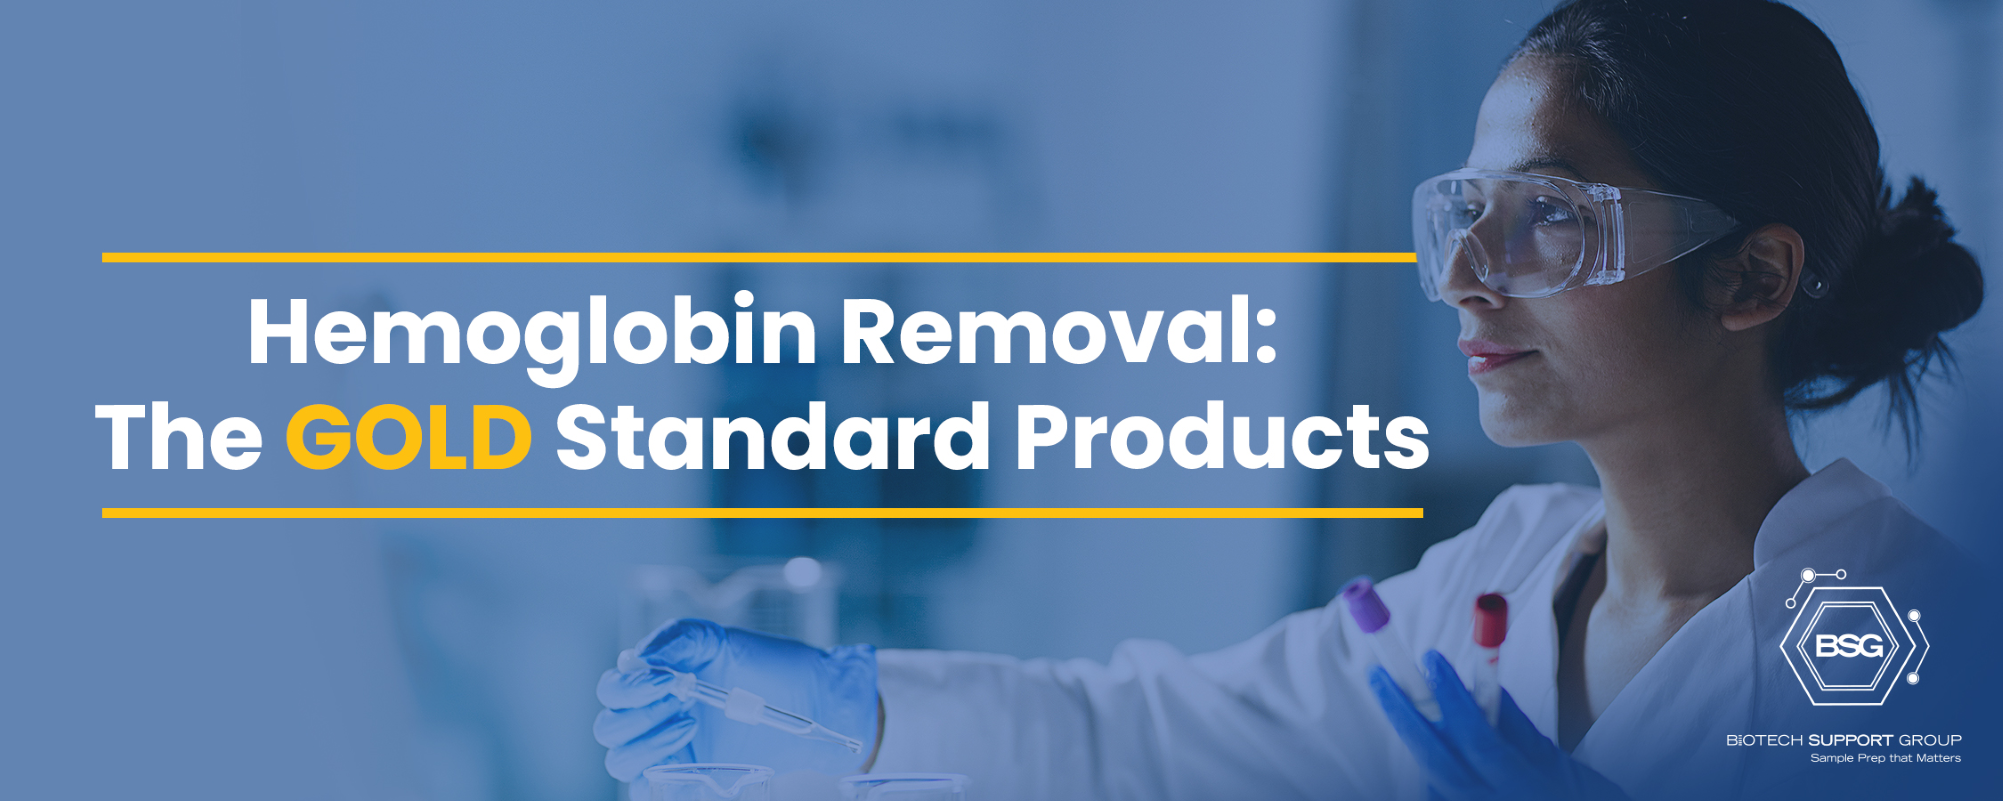 BSG Hemoglobin Removal: The Gold Standard Products